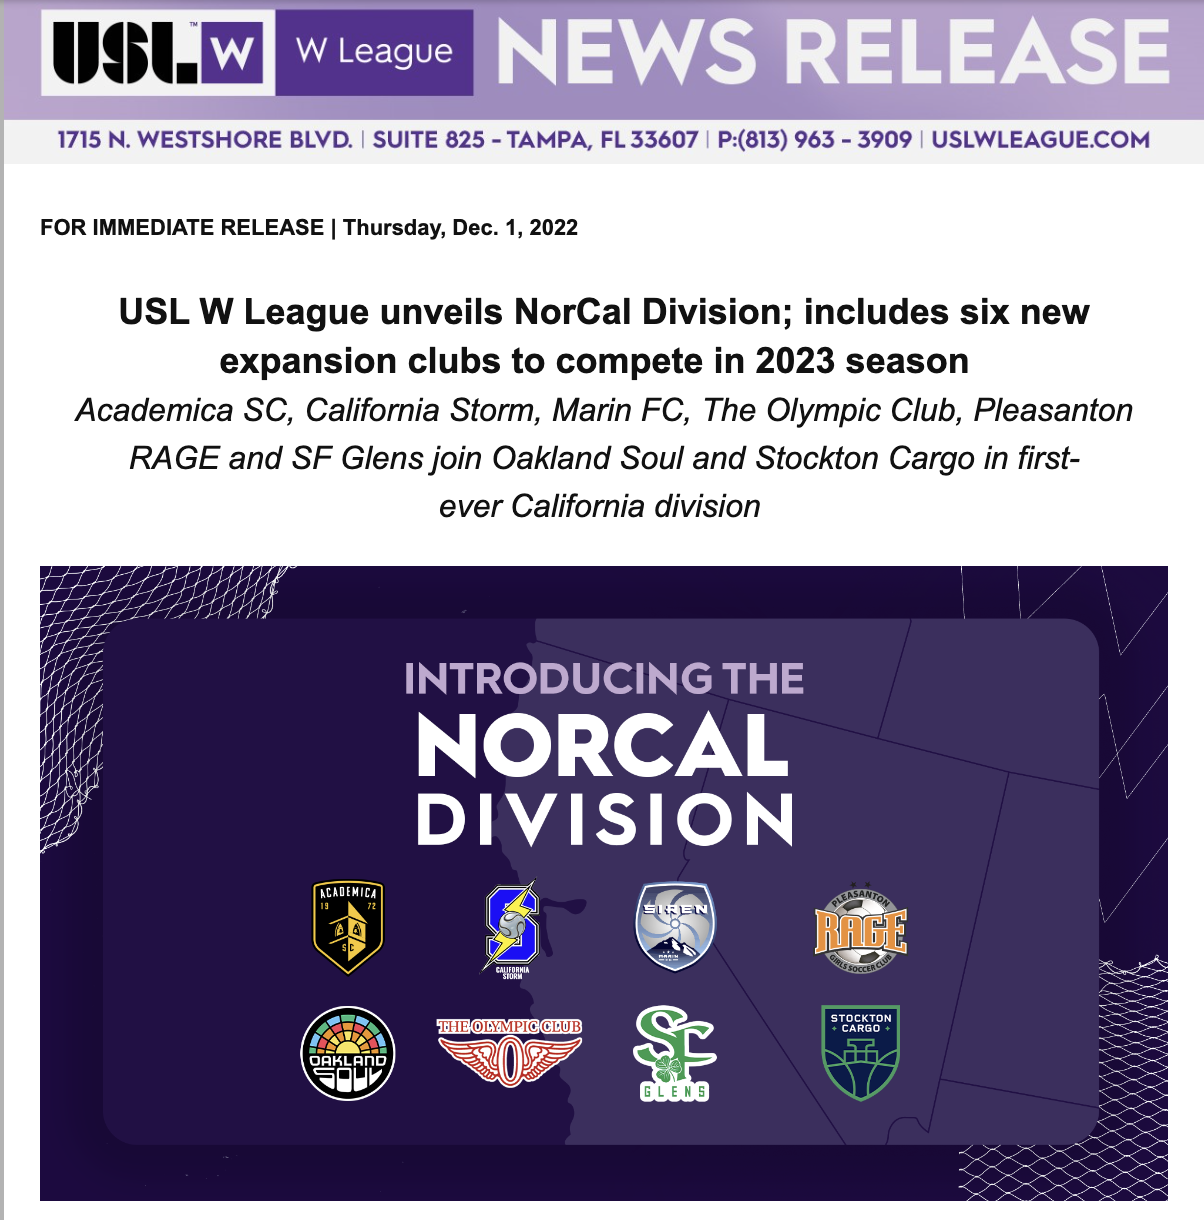 USLw Norcal Division 